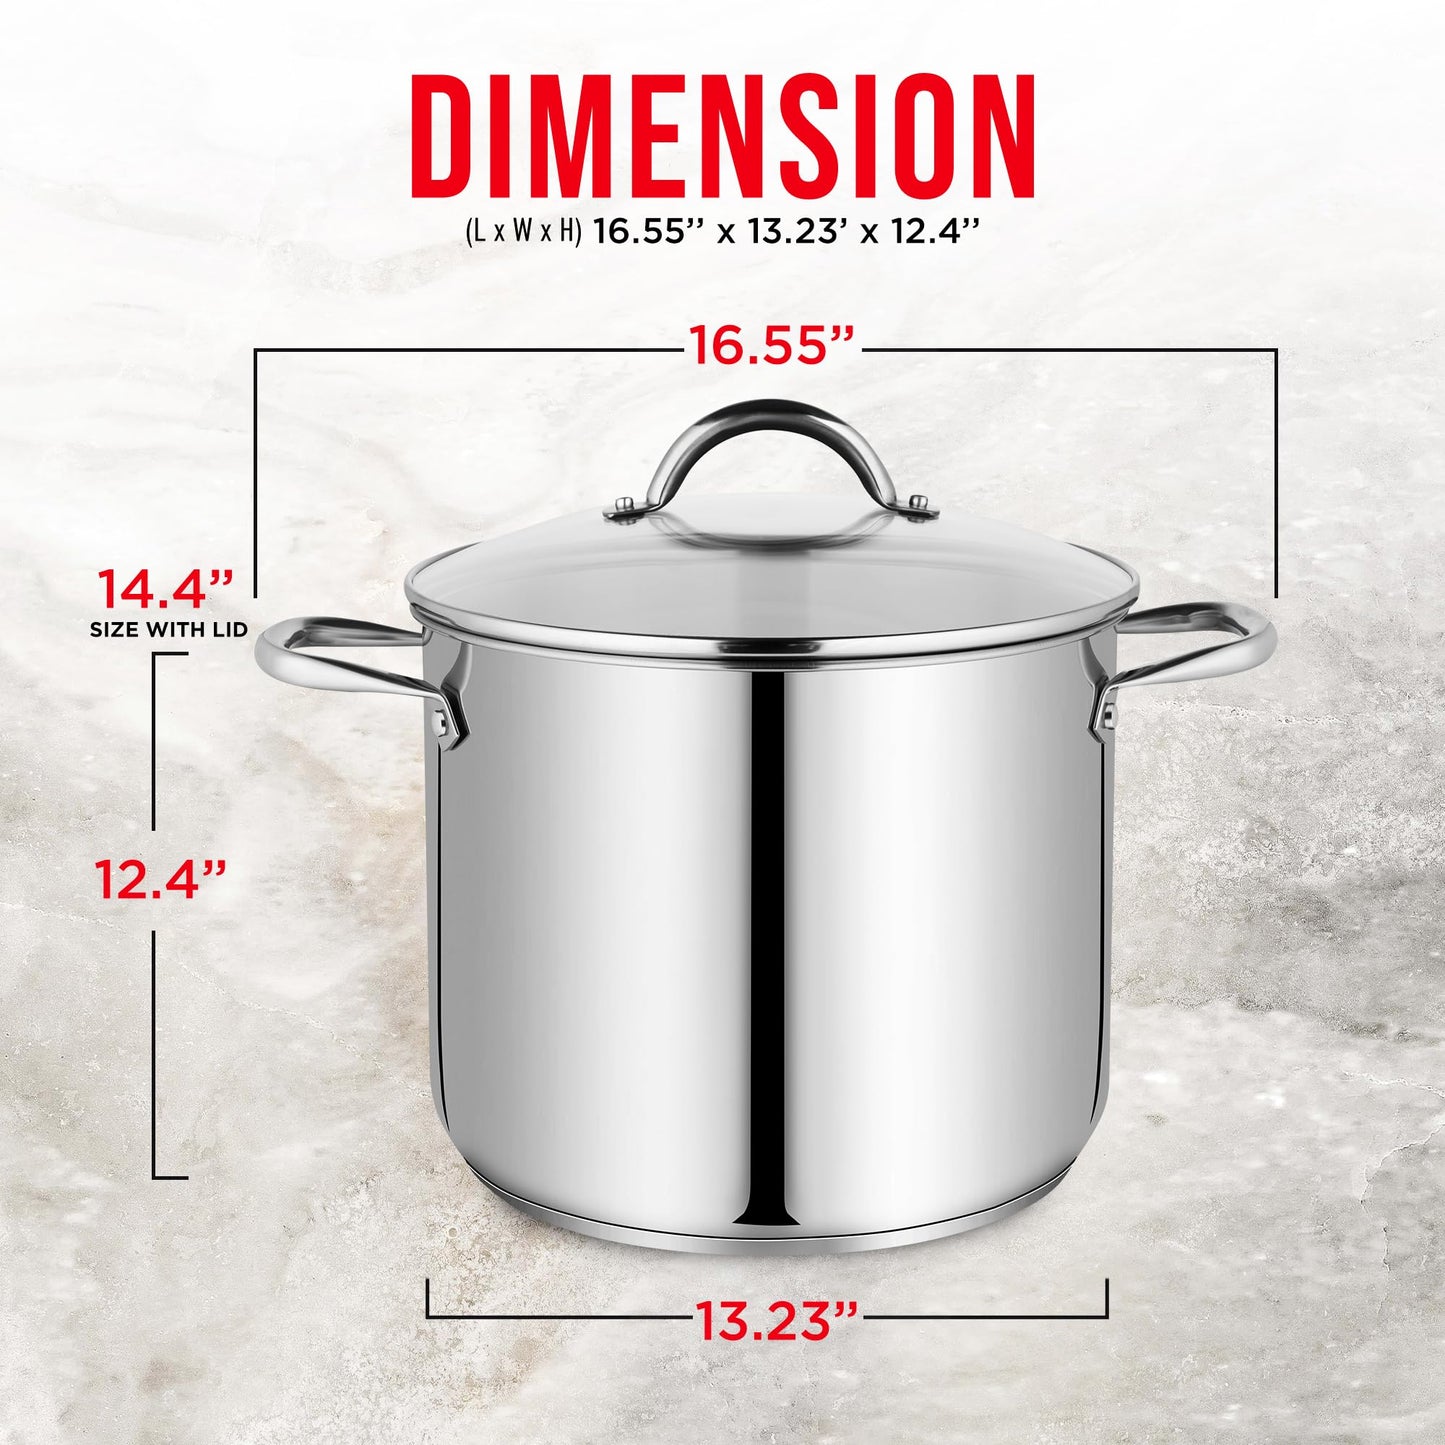 Bakken-Swiss Deluxe 24-Quart Stainless Steel Stockpot w/Tempered Glass See-Through Lid - Simmering Delicious Soups Stews & Induction Cooking - Exceptional Heat Distribution - Heavy-Duty & Food-Grade